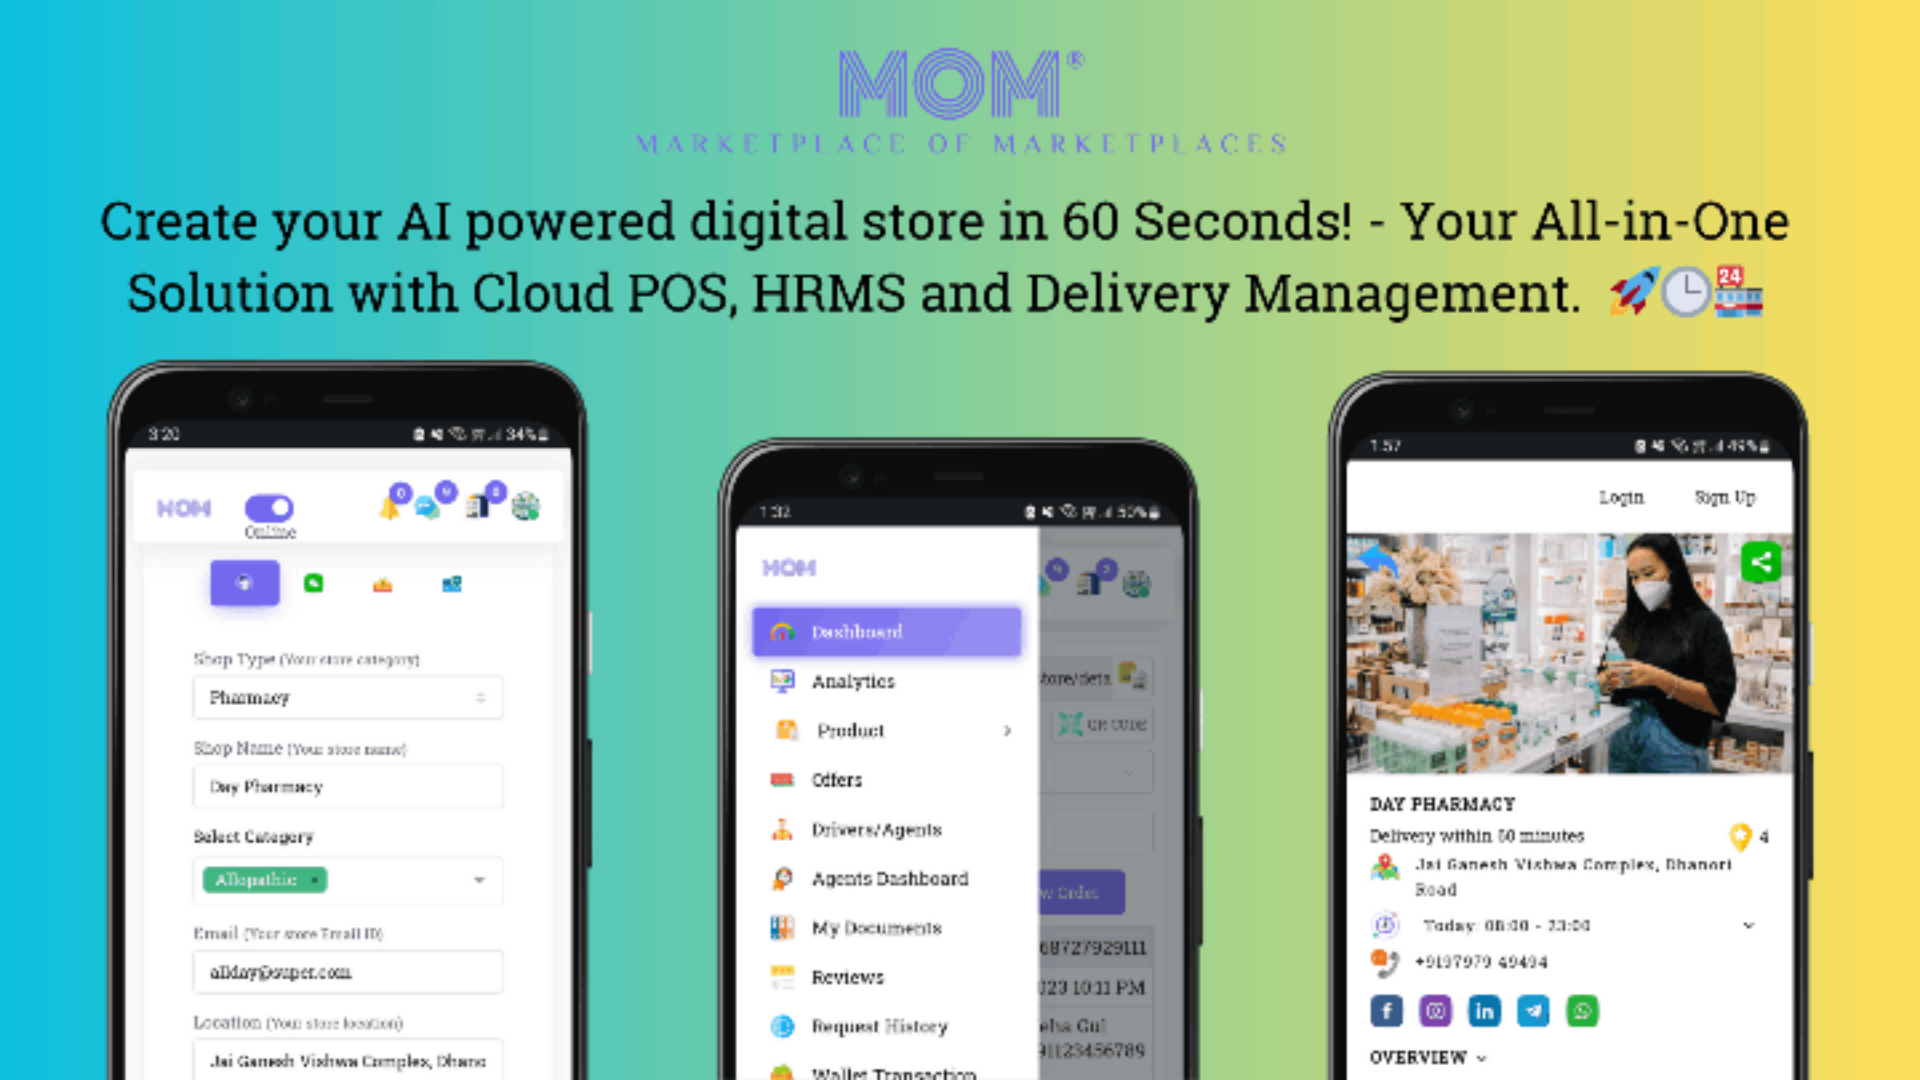 Lifetime Deal to MOM Shop App-AI powered store creator: PRO MAX for $299